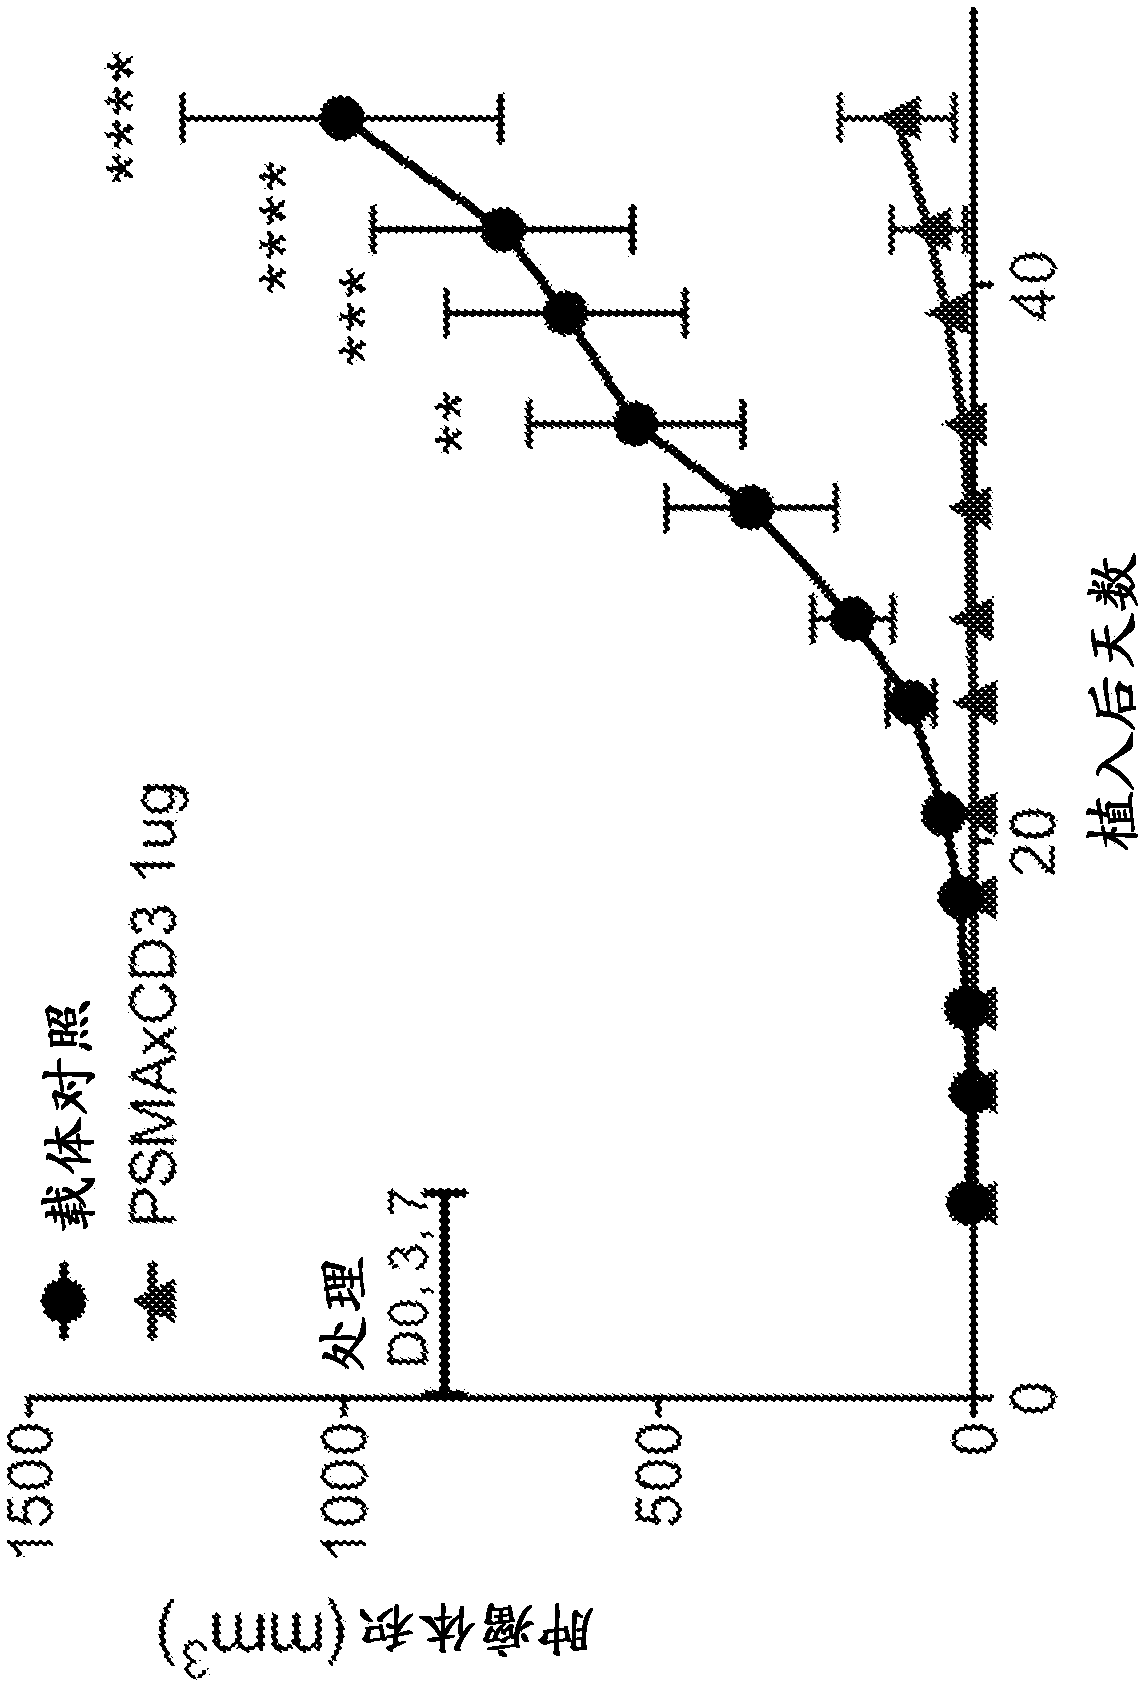 Anti-psma antibodies, bispecific antigen-binding molecules that bind psma and cd3, and uses thereof